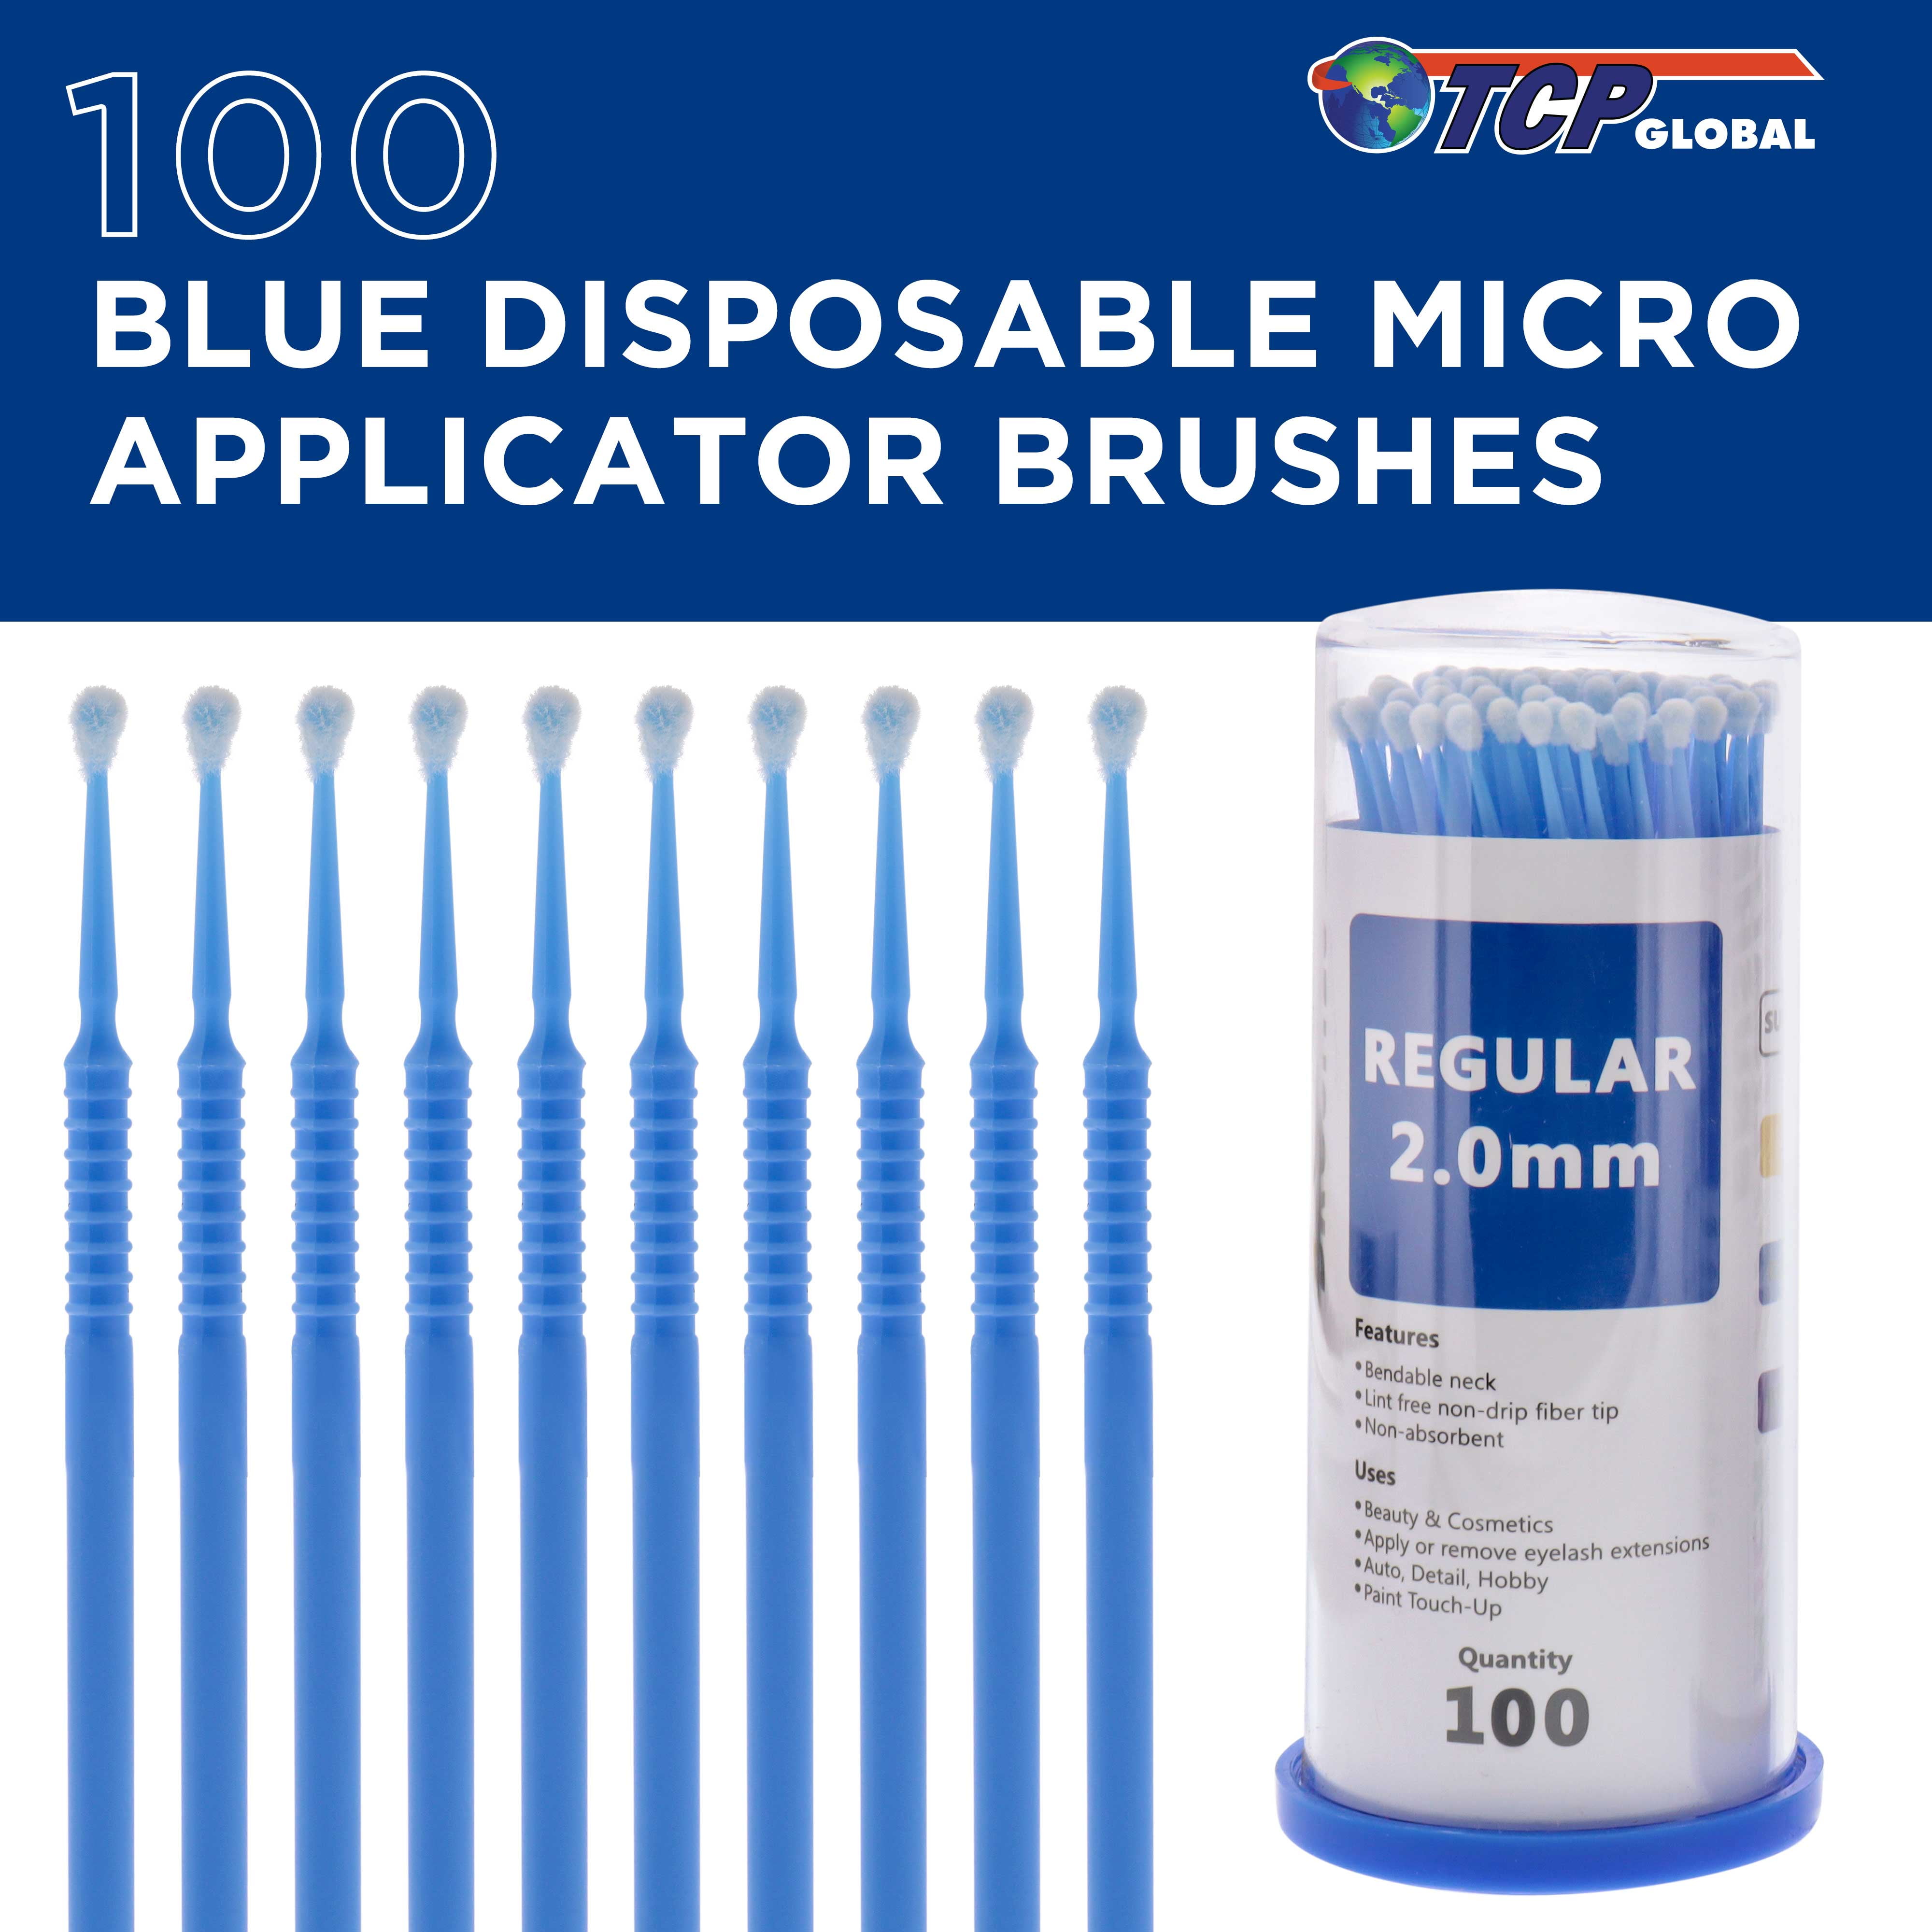 Paint Touch Up Micro Brushes, 100 Superfine 1.0 Mm — Belloccio